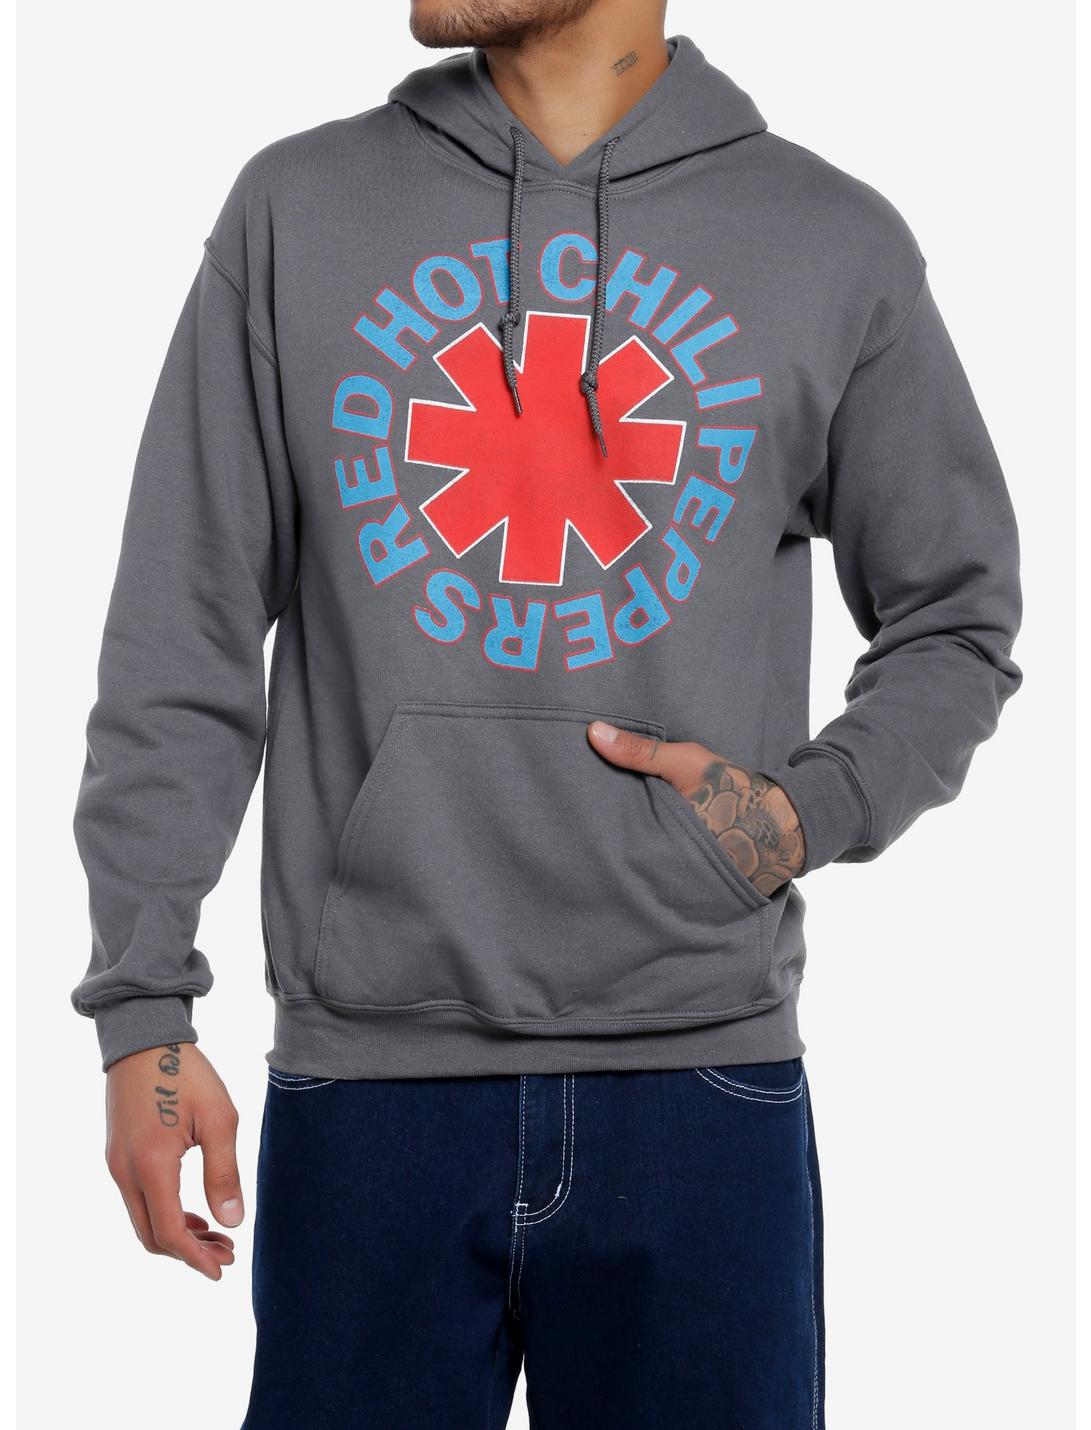 Red Hot Chili Peppers Logo Grey Hoodie, BLACK, hi-res